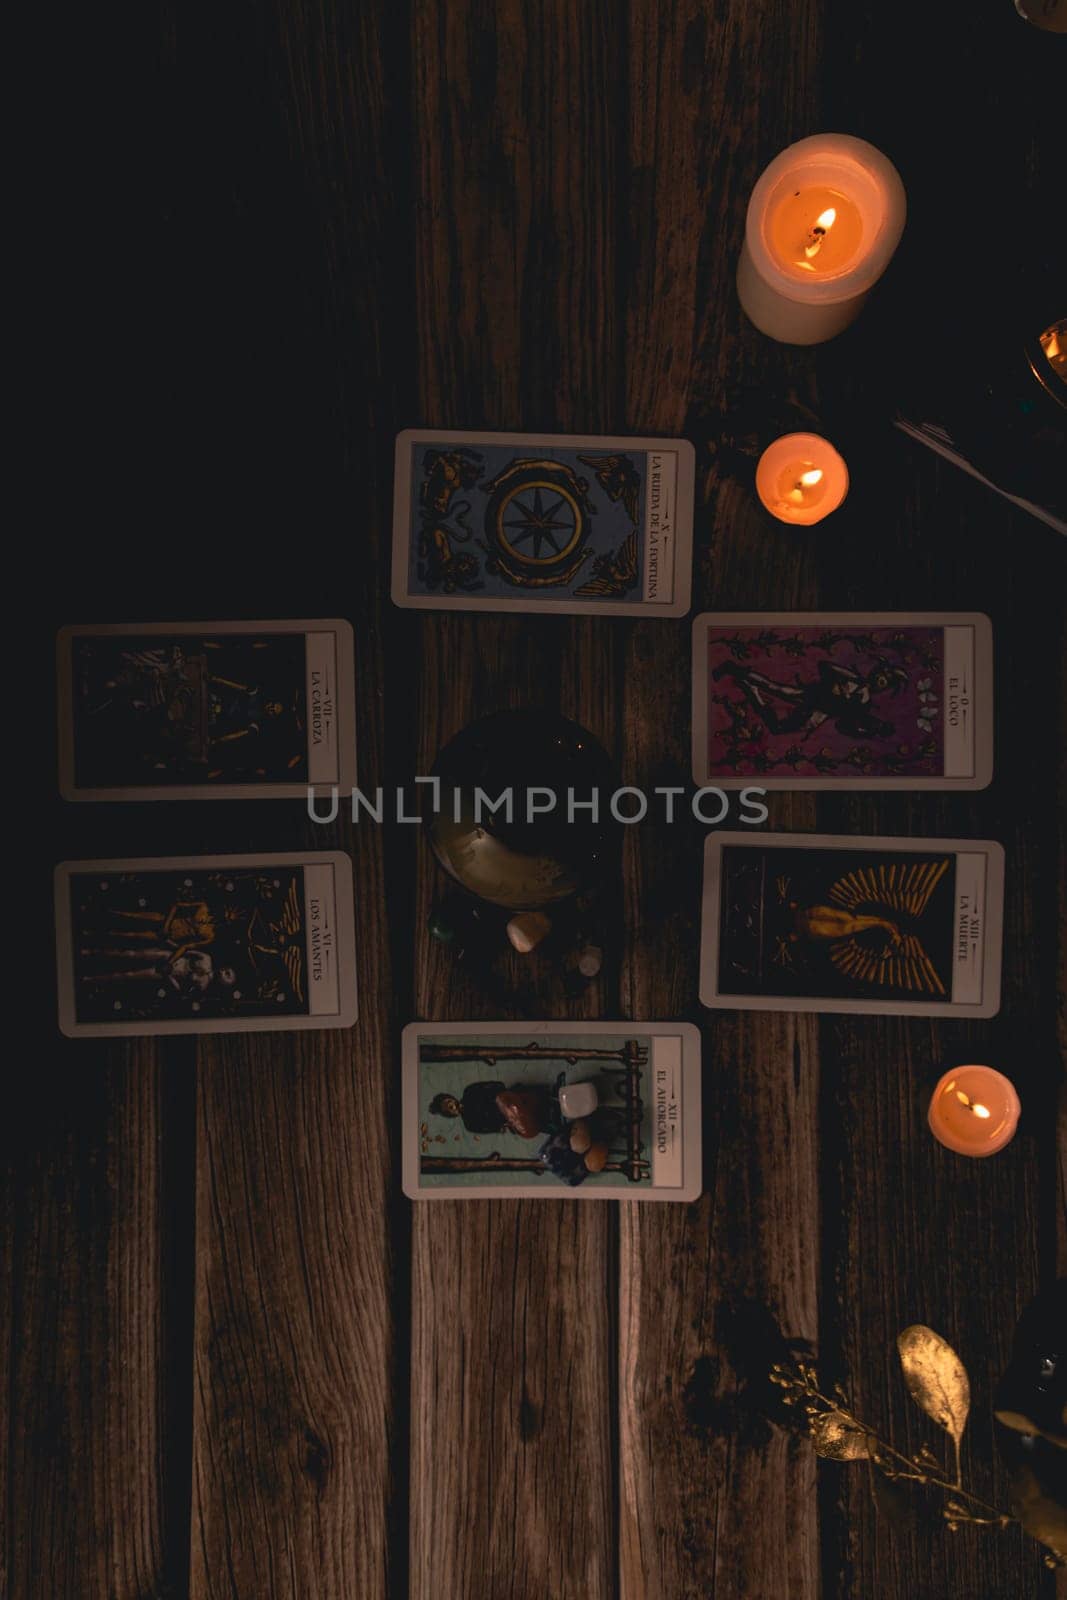 Tarot cards including The Fool and The Lovers alongside crystals and candles on a textured wooden table